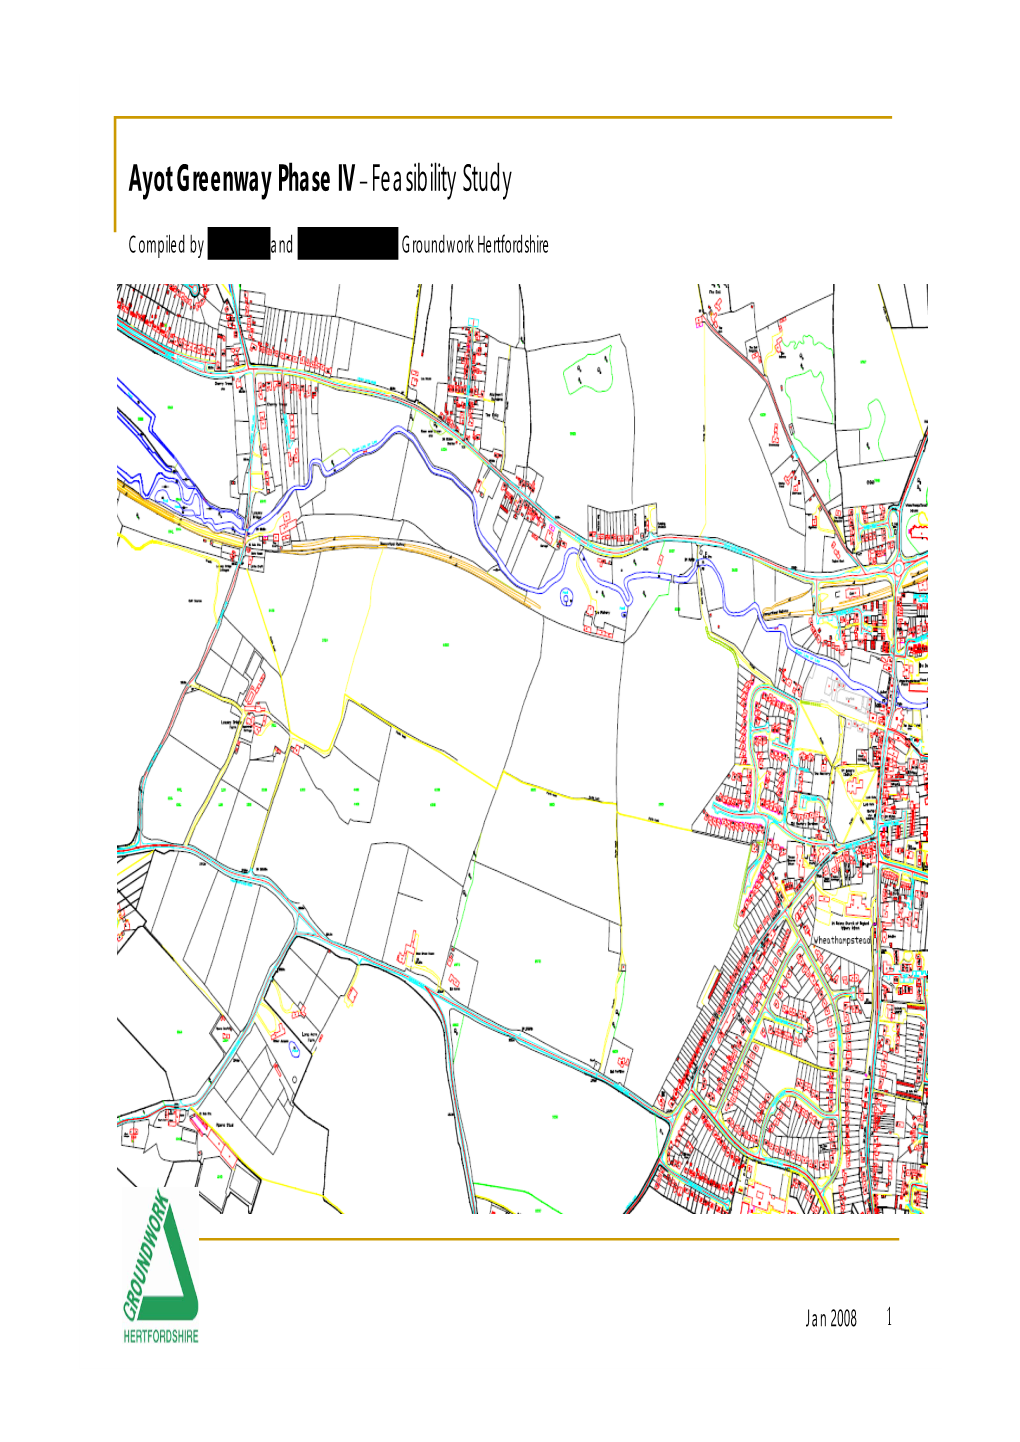 Ayot Greenway Phase IV – Feasibility Study